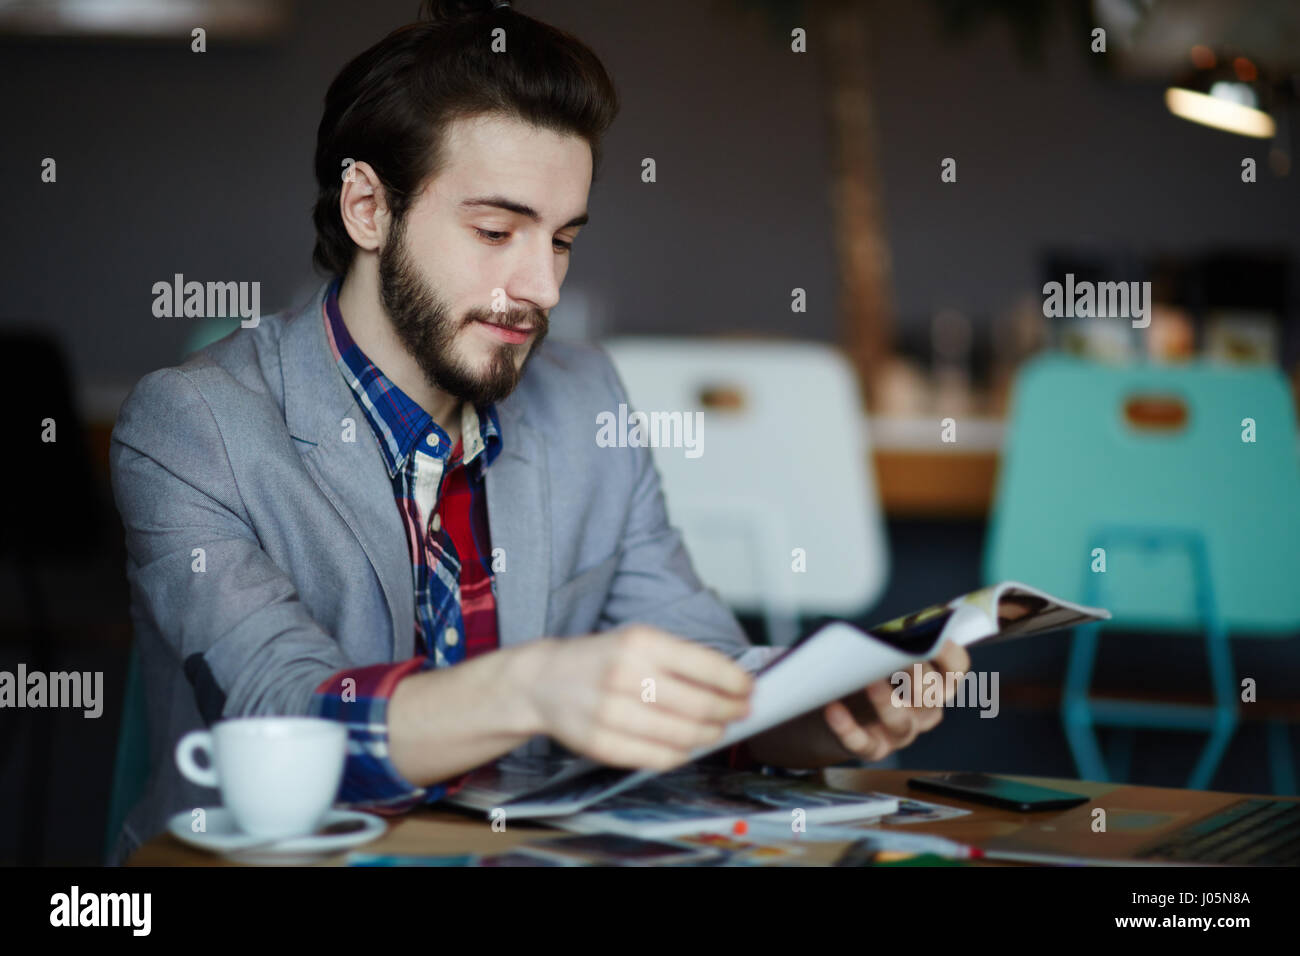 Portrait of confident long haired man wearing business casual clothes sitting at table in cafe reading magazines Stock Photo